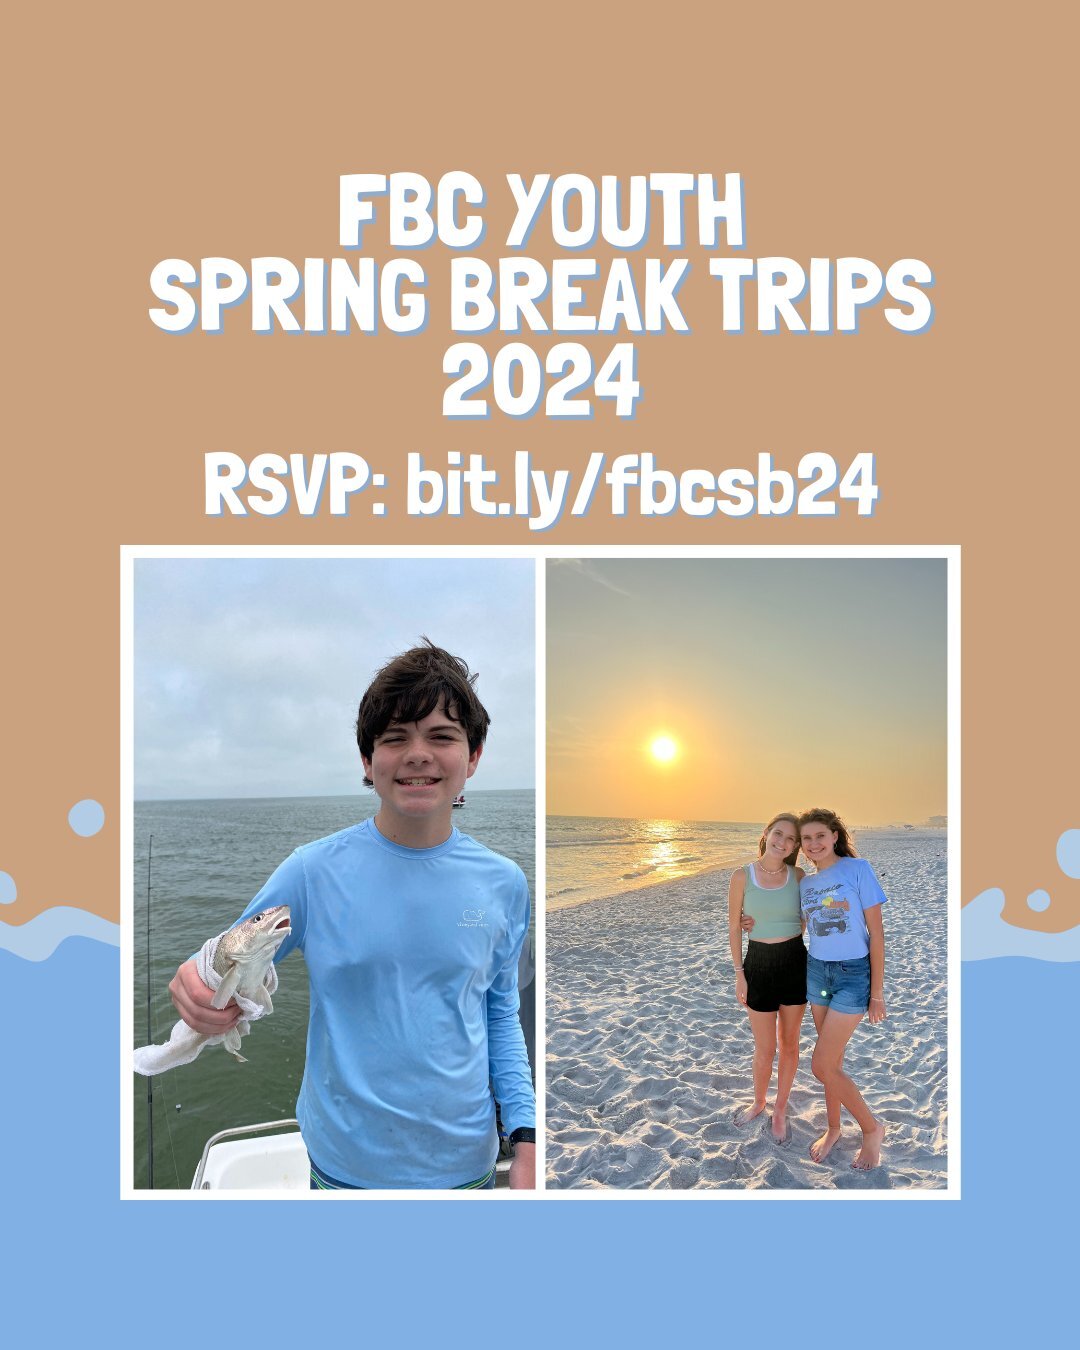 Last call for Spring Break RSVPs! Get yours in now!

bit.ly/fbcsb24